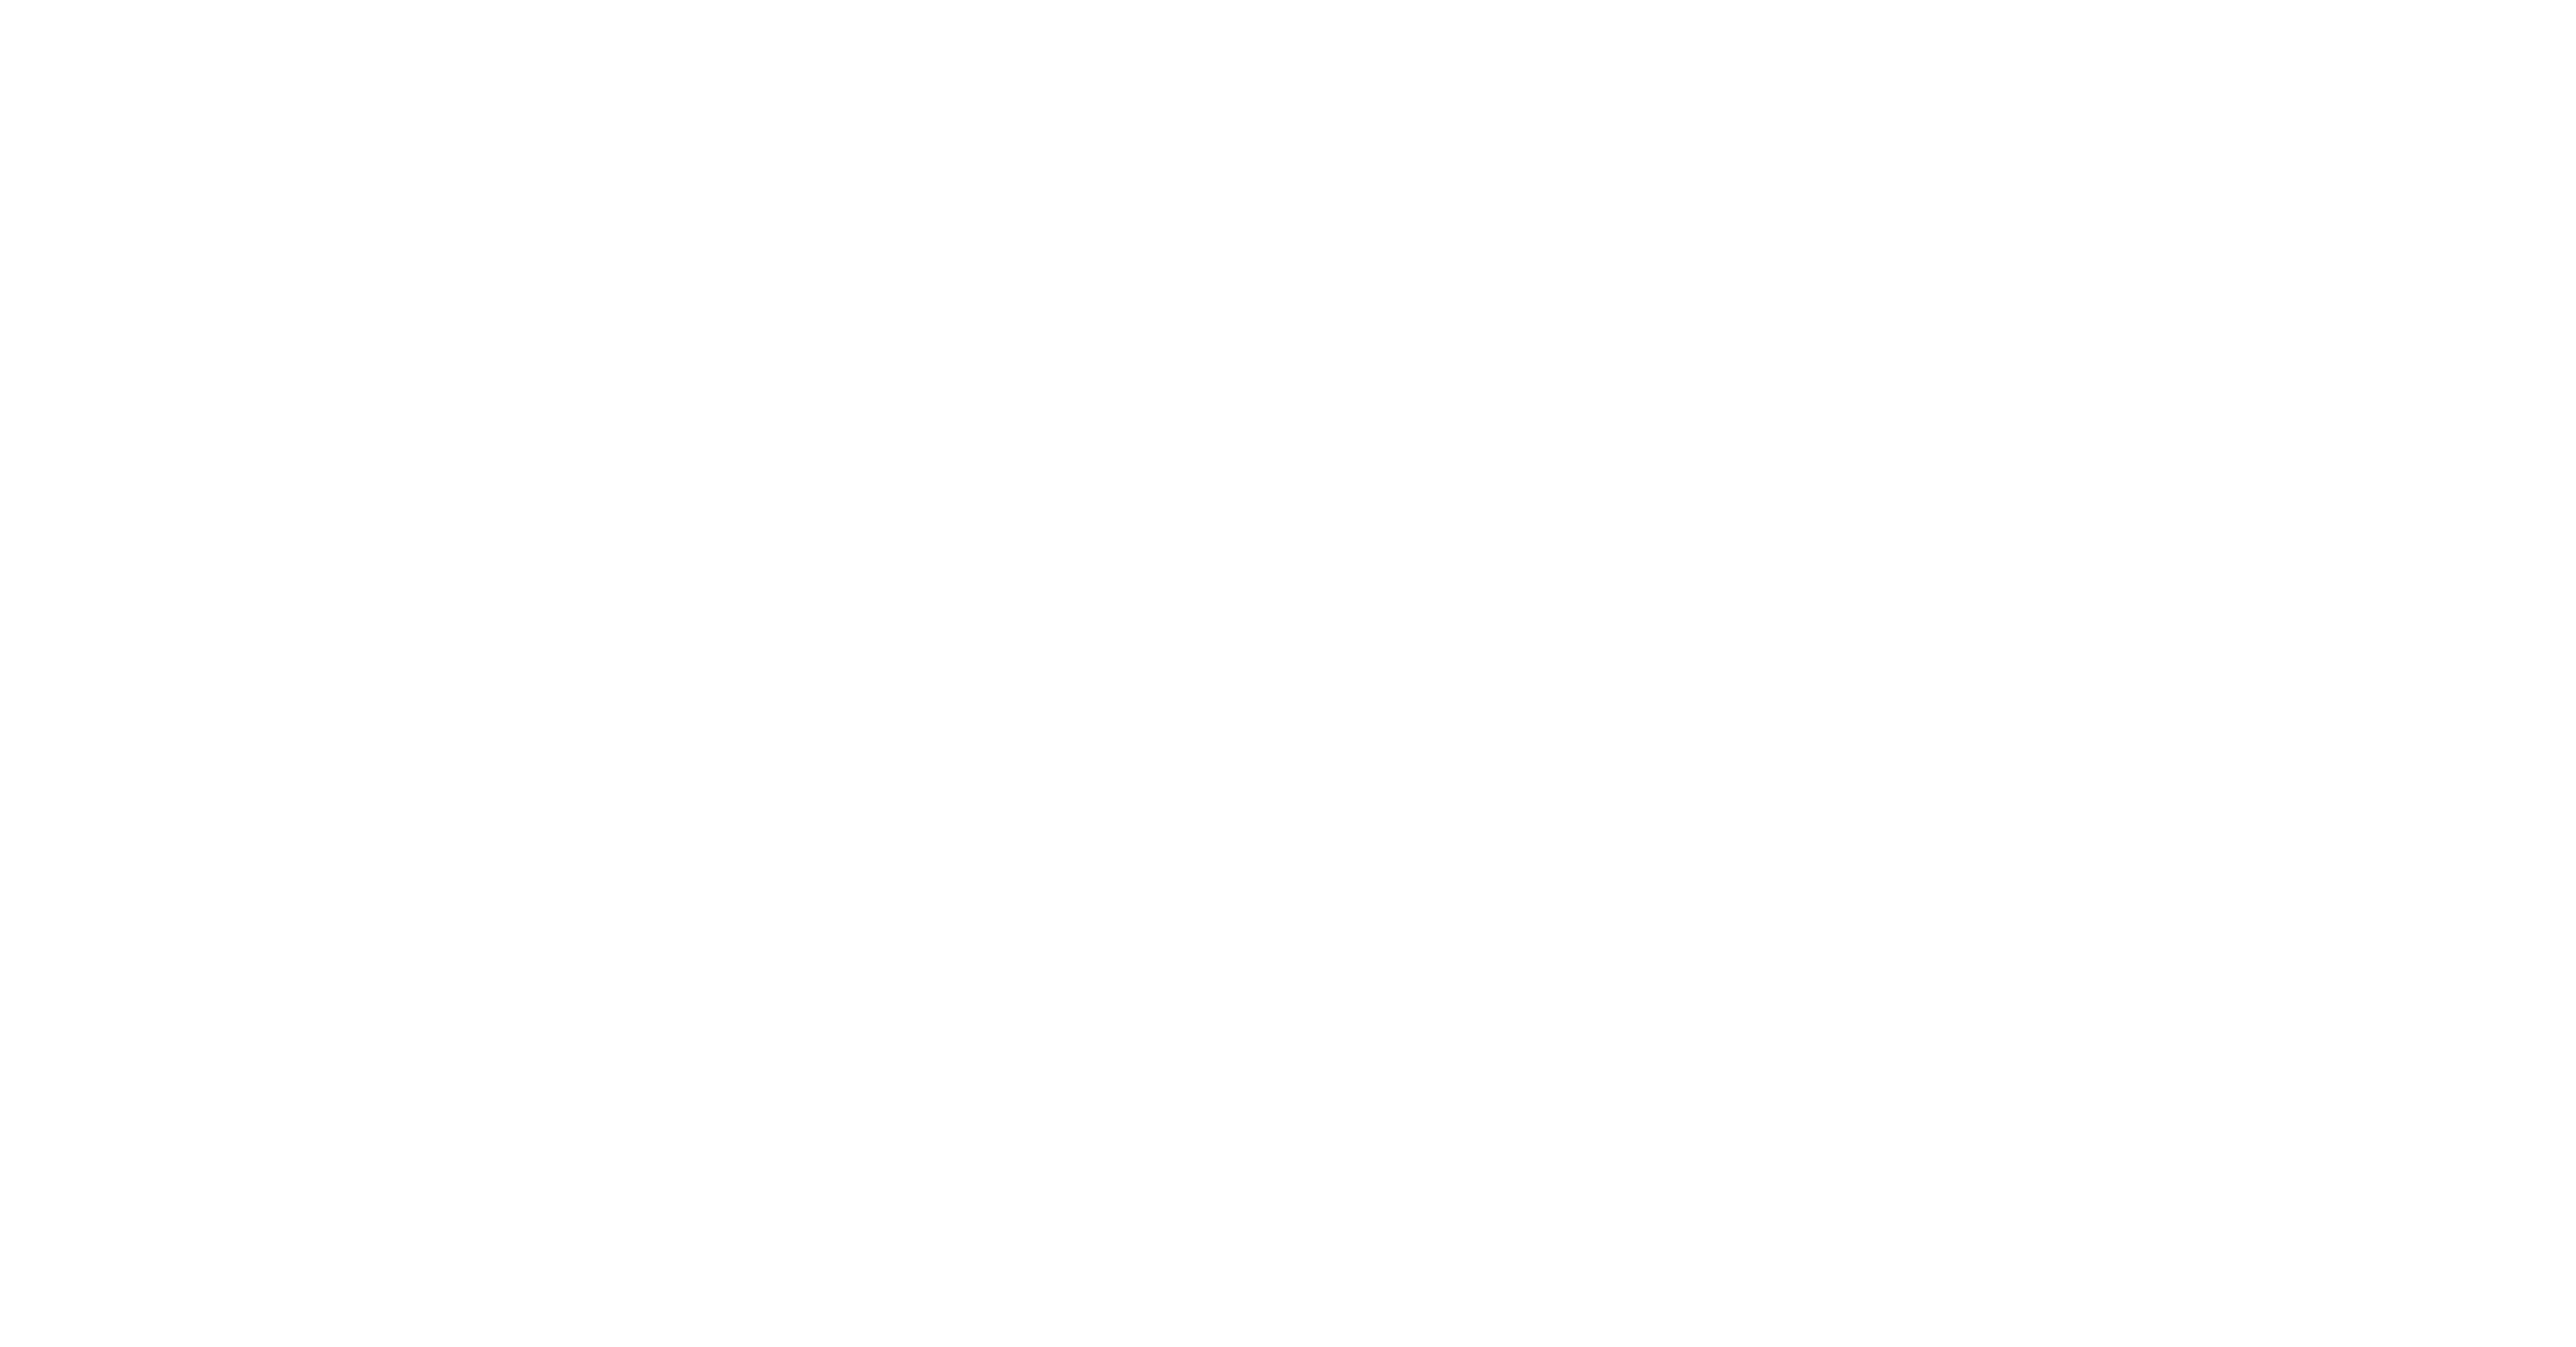 CCRE CEMR - Territorial Governance, Powers and Reforms in Europe - 2021 Edition: Focus on Local Health Care Systems